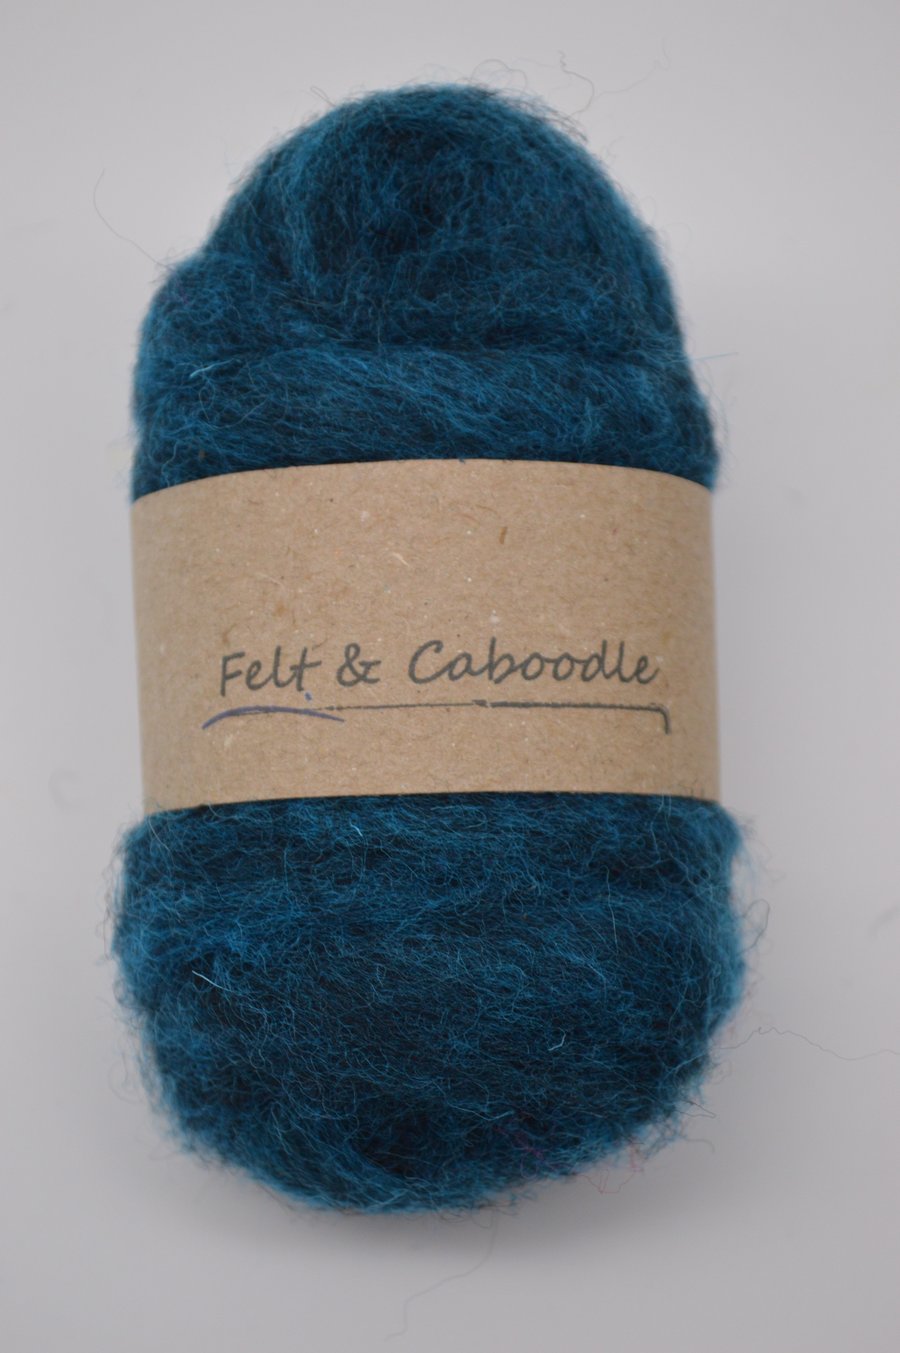 Carded Corriedale woolcolour mix, Blue